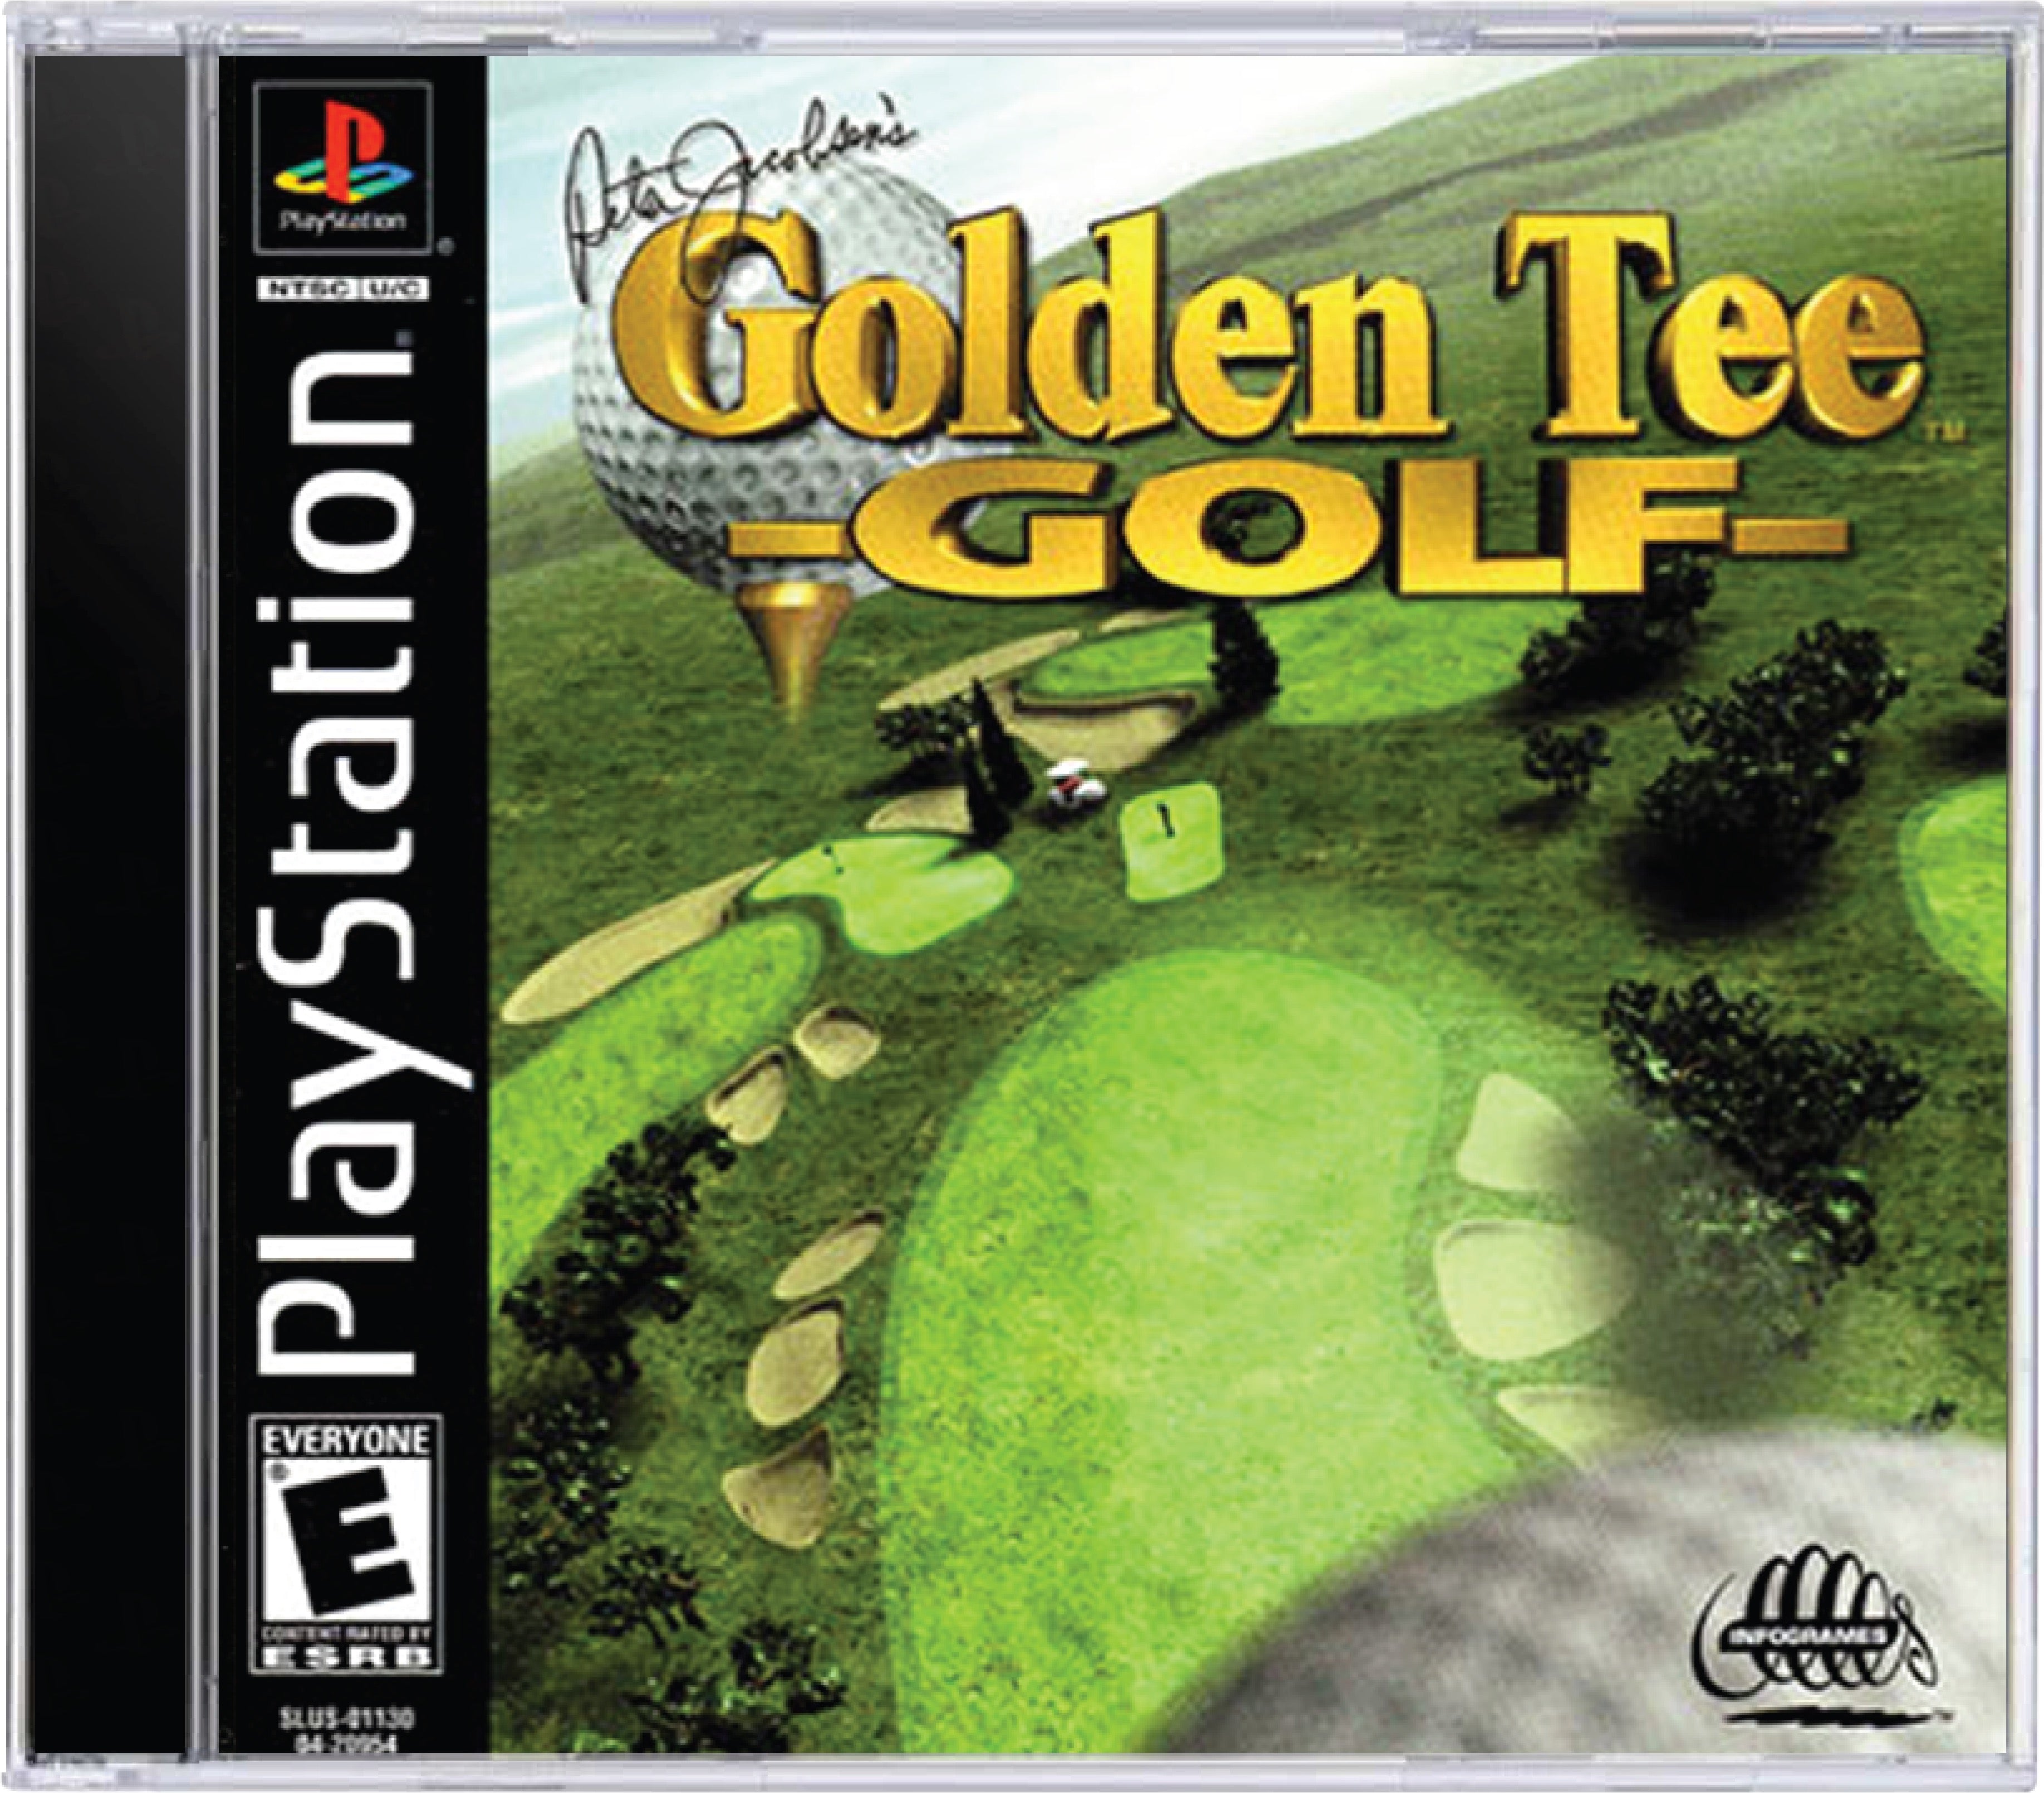 Golden Tee Golf Cover Art and Product Photo